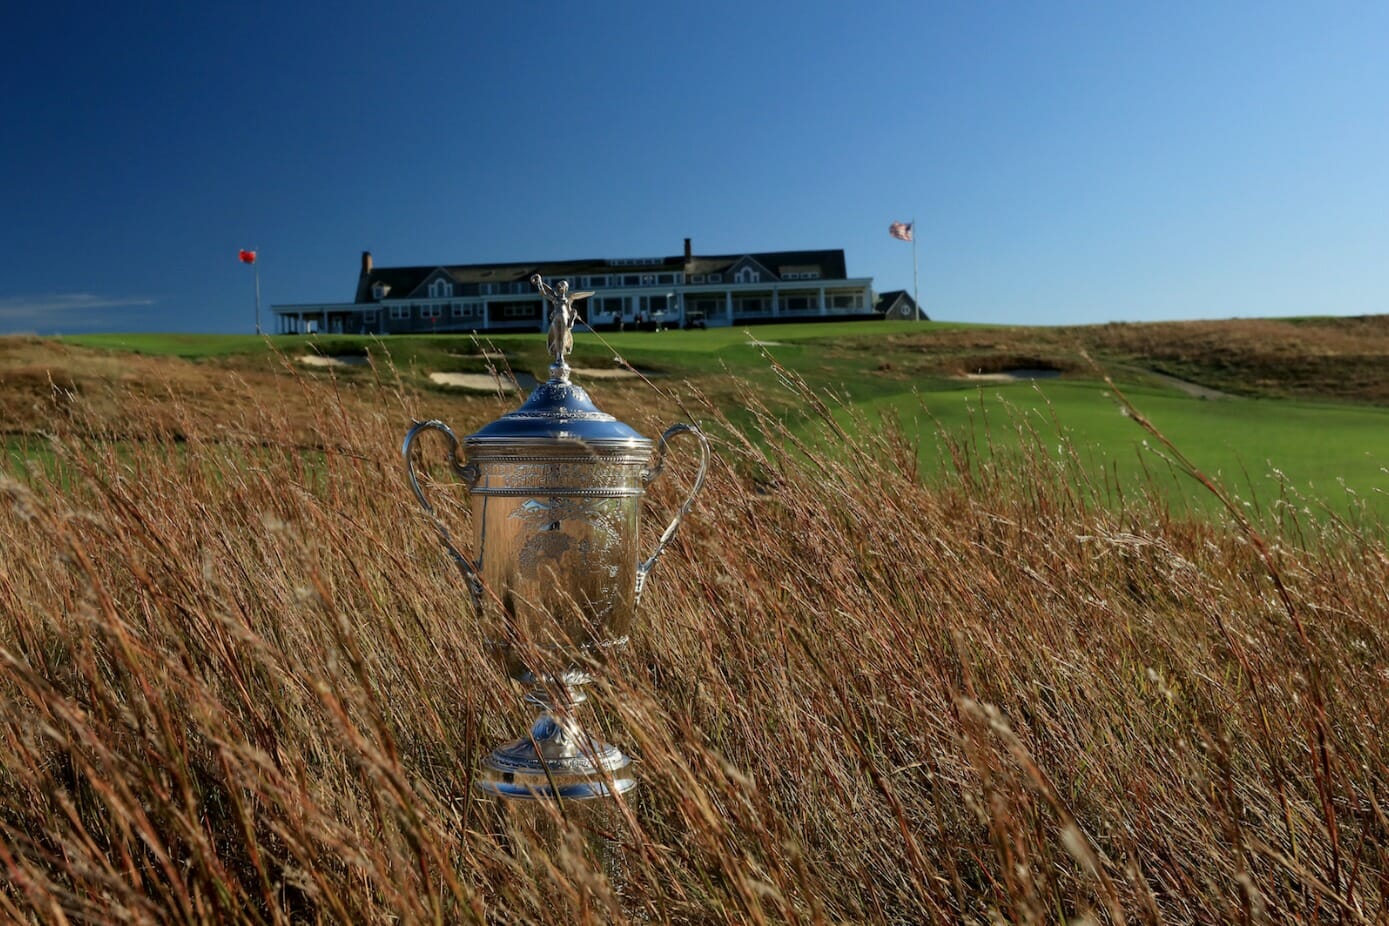 "Suffer you Mothers" – The U.S. Open is meant to hurt